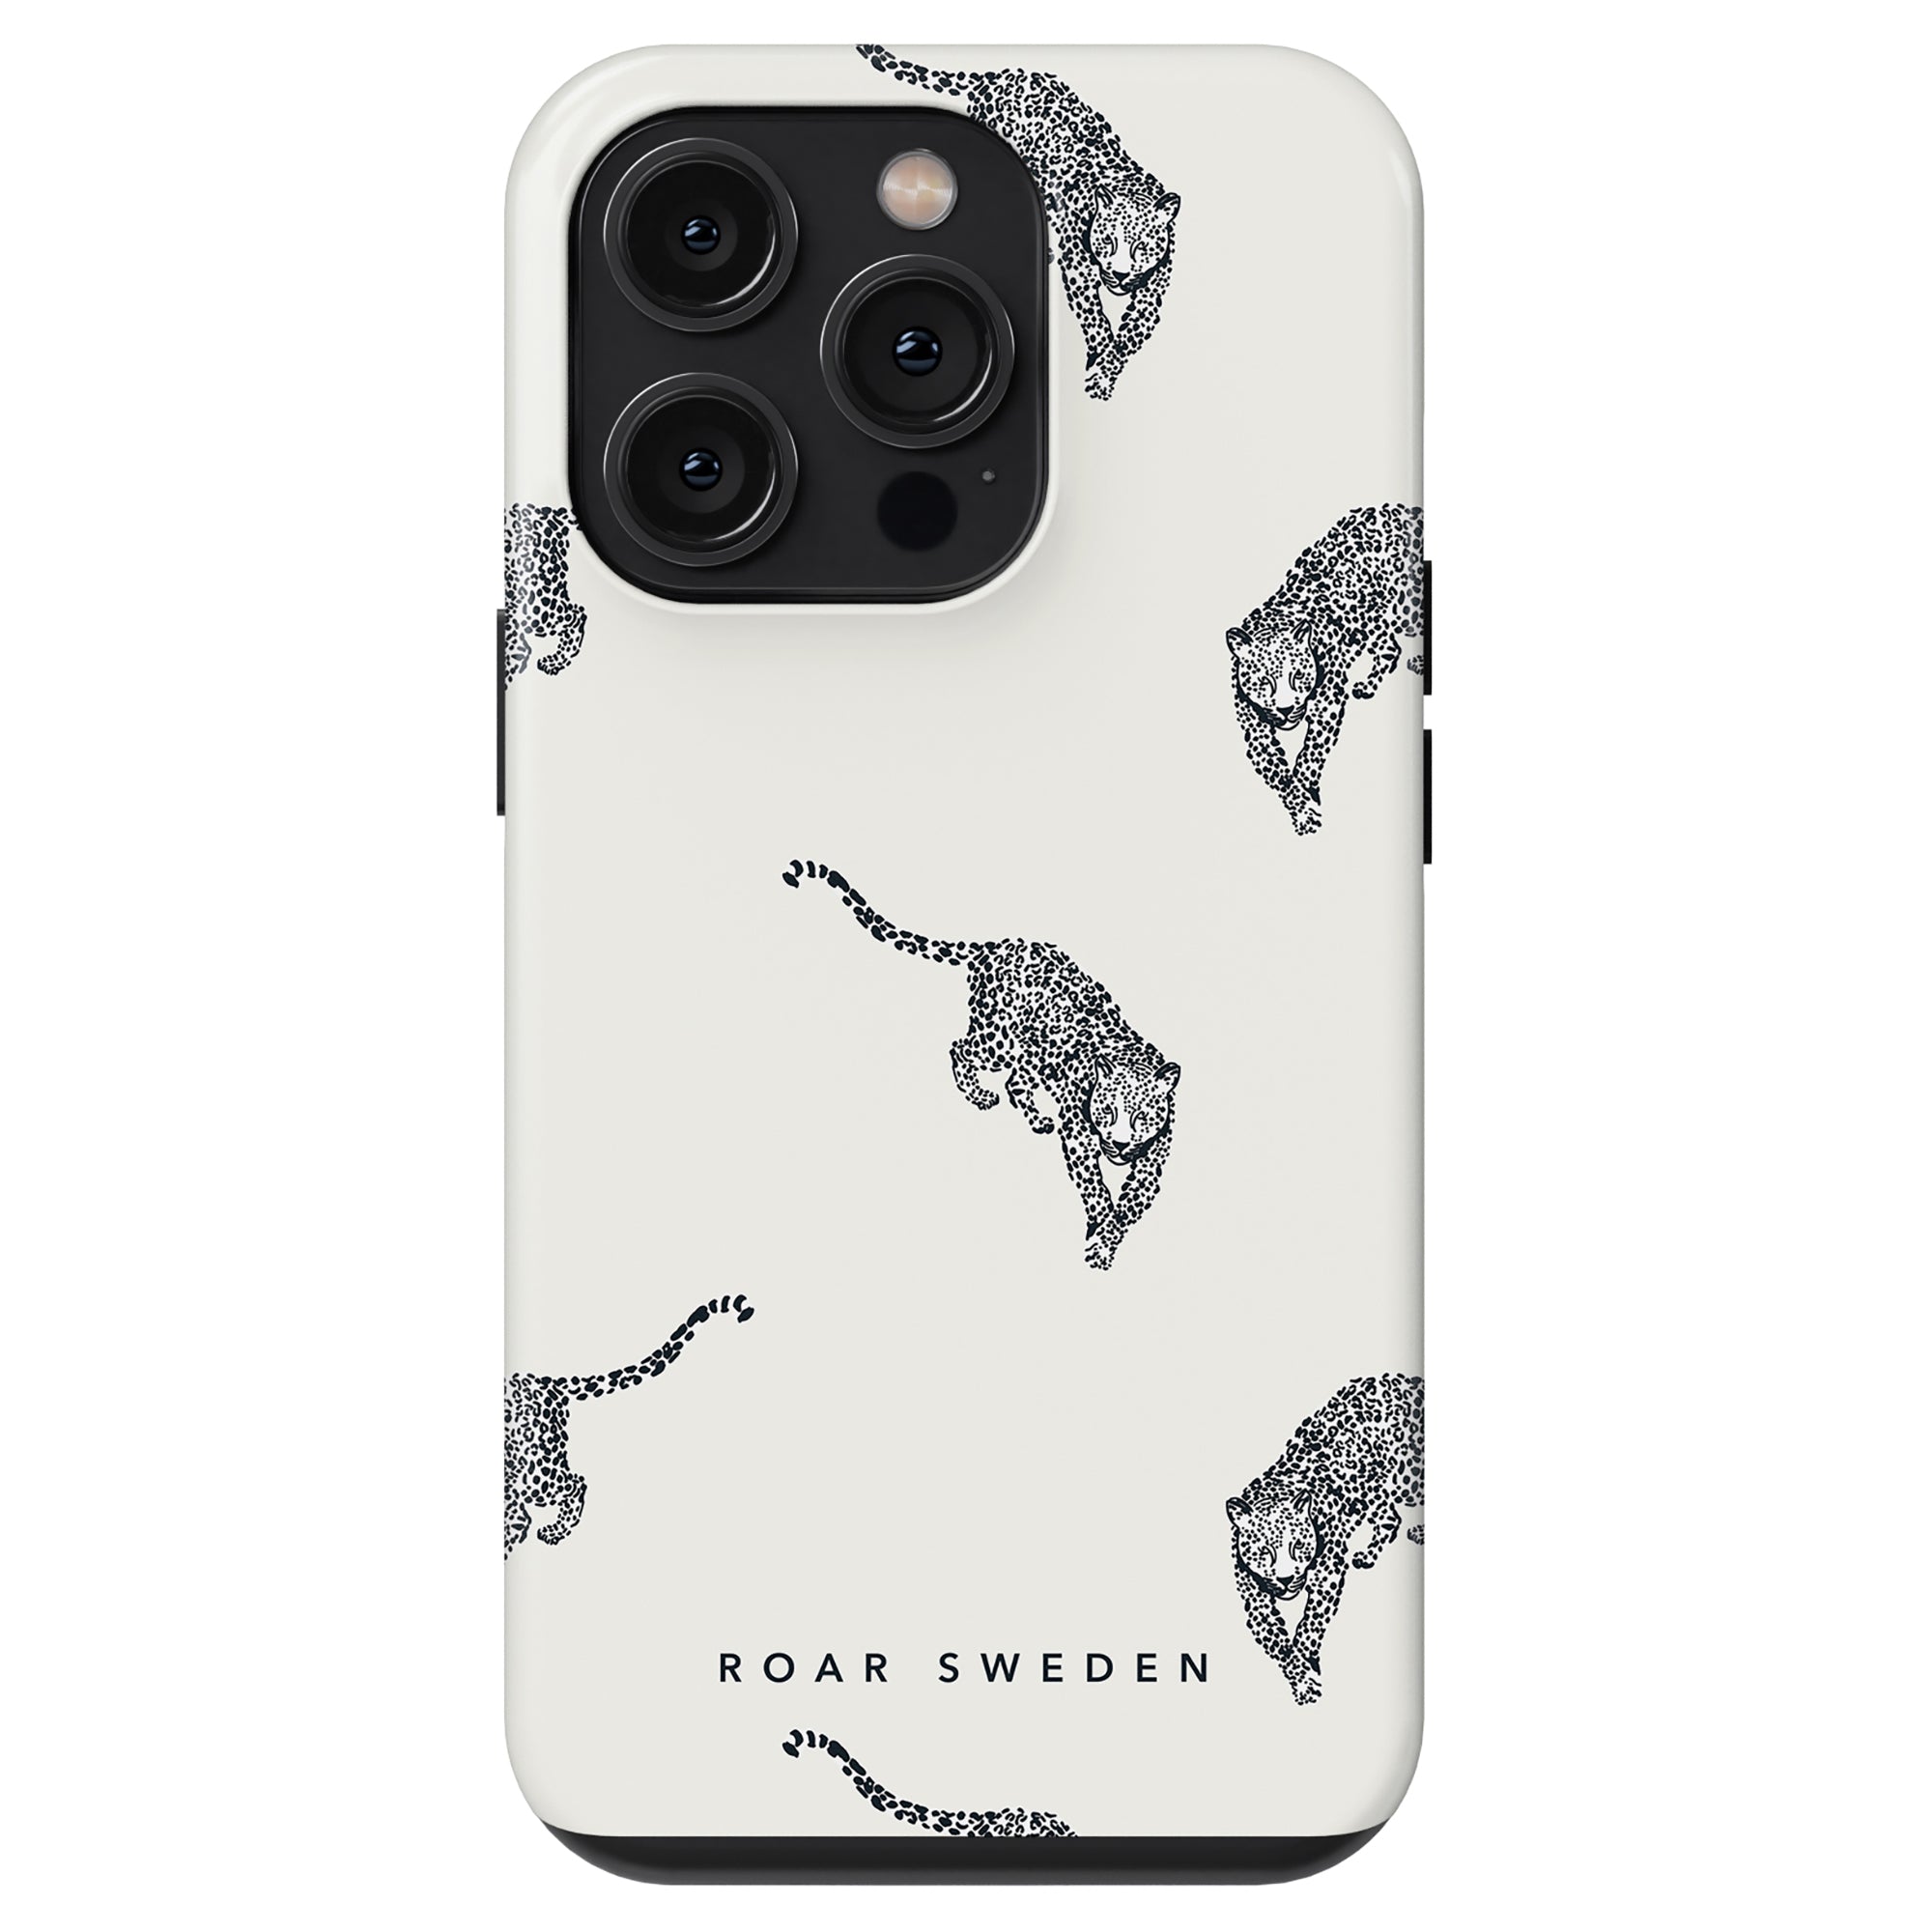 An elegant white Kitty Deluxe - Tough Case with an innovative image of a tiger.